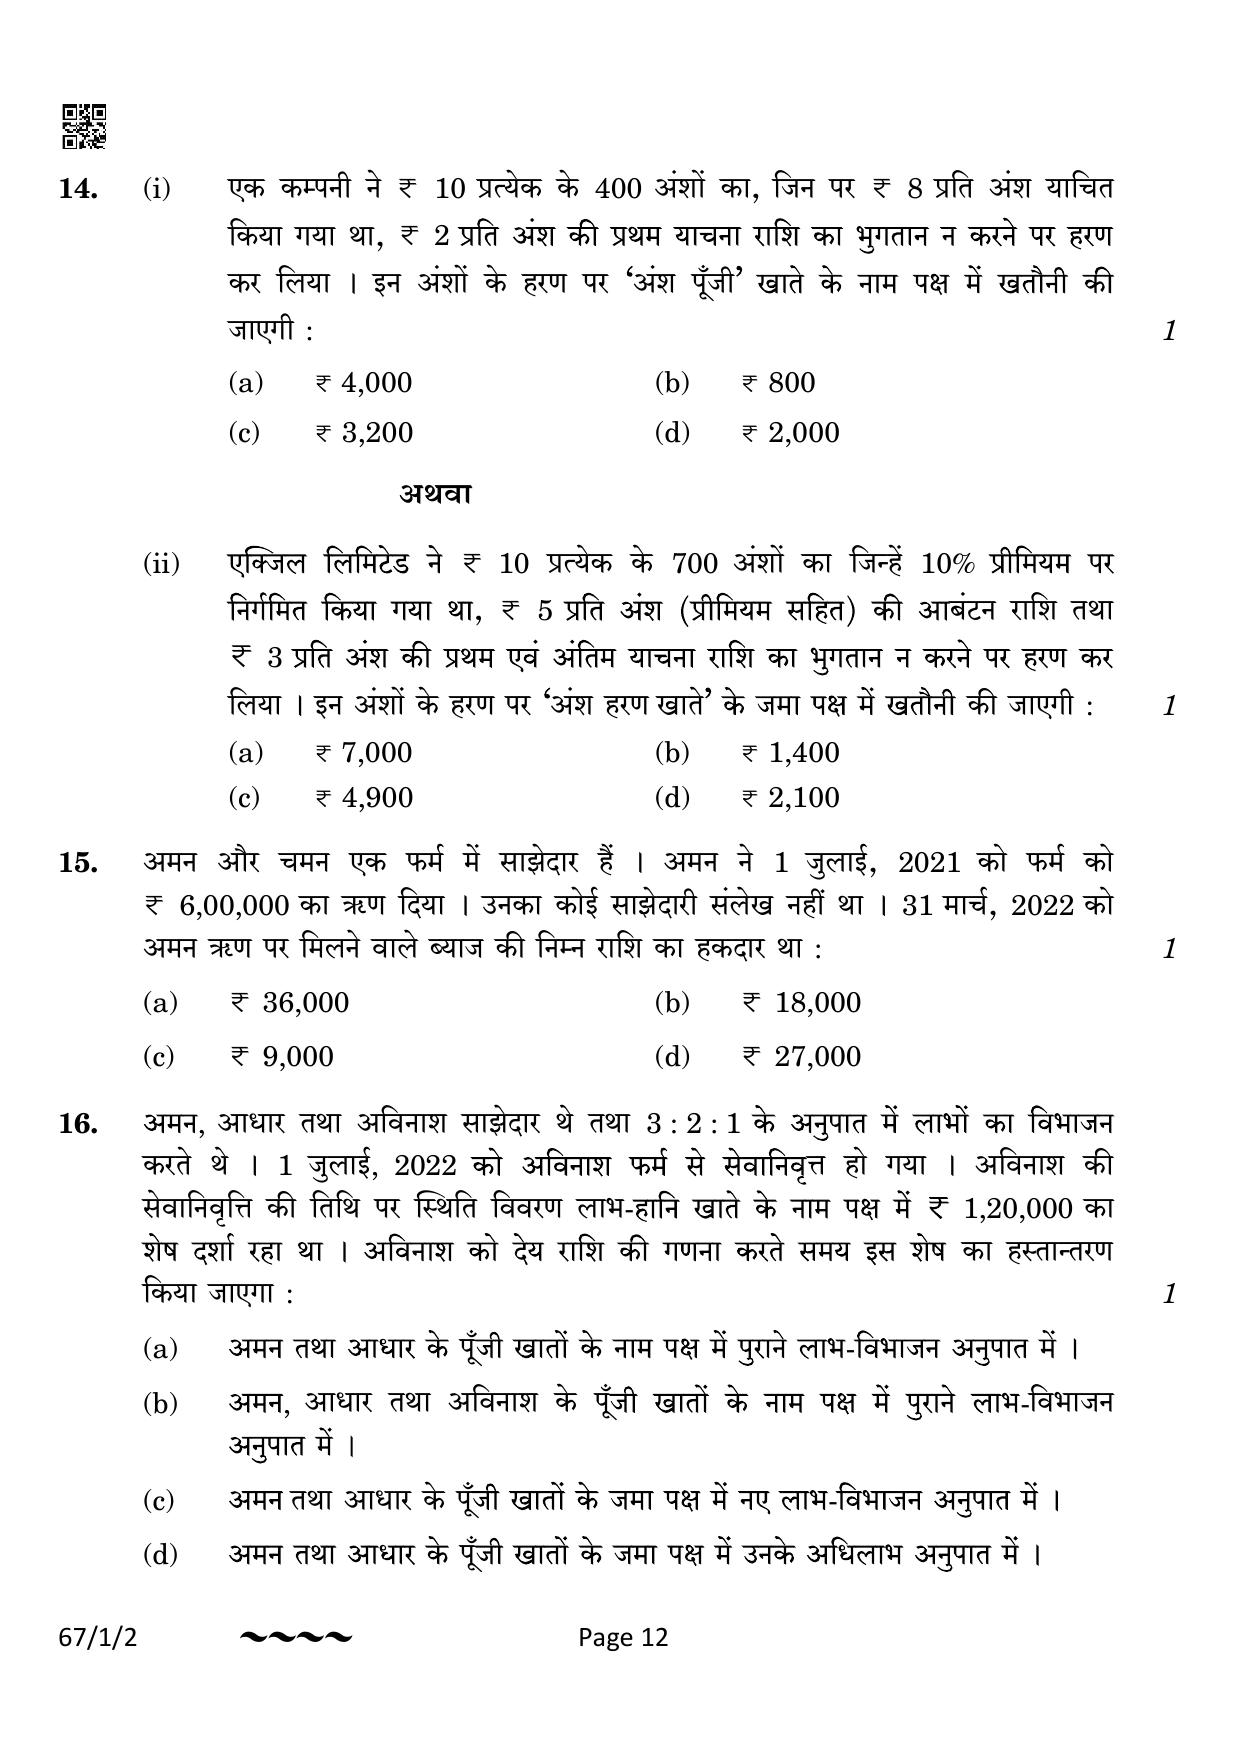 CBSE Class 12 67-1-2 Accountancy 2023 Question Paper - Page 12